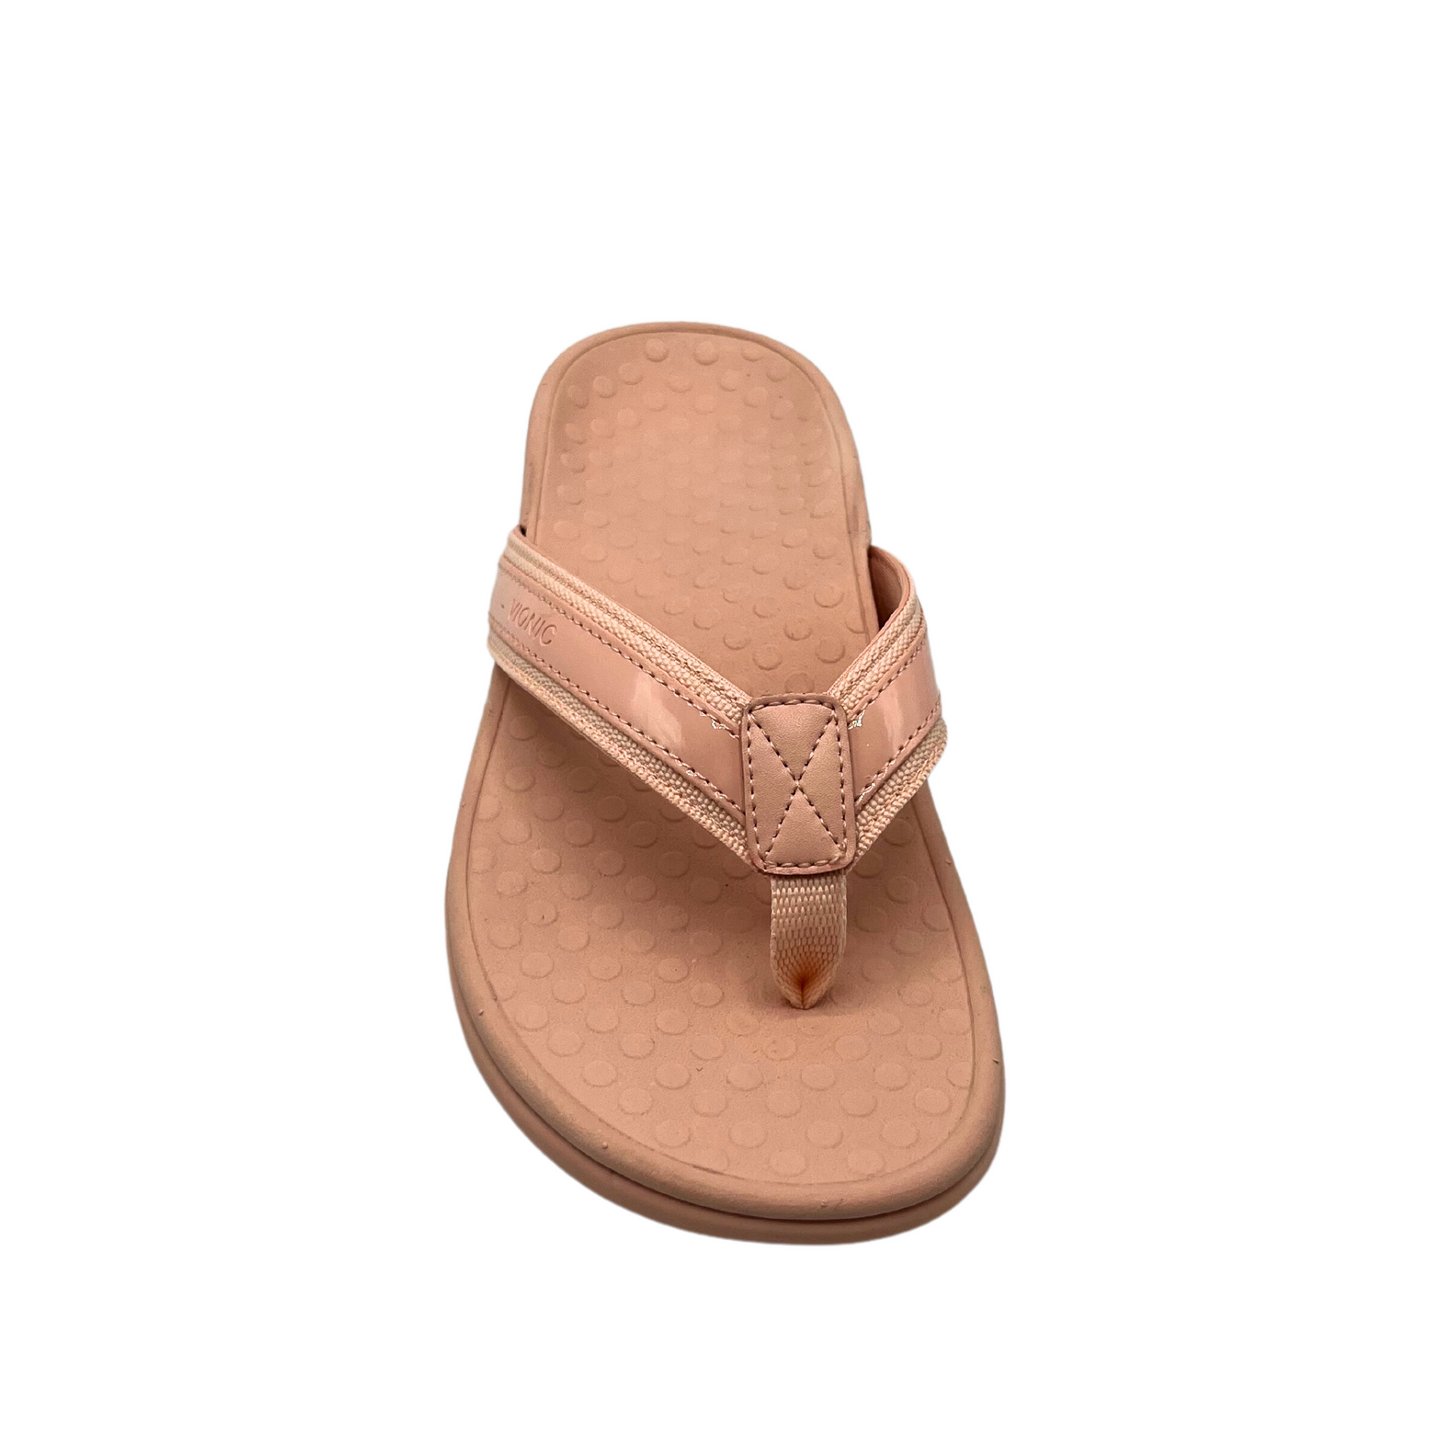 Top down view of flip flop sandal.  Toe post with wide straps. Shown in a rose color but also available in black and a matcha green